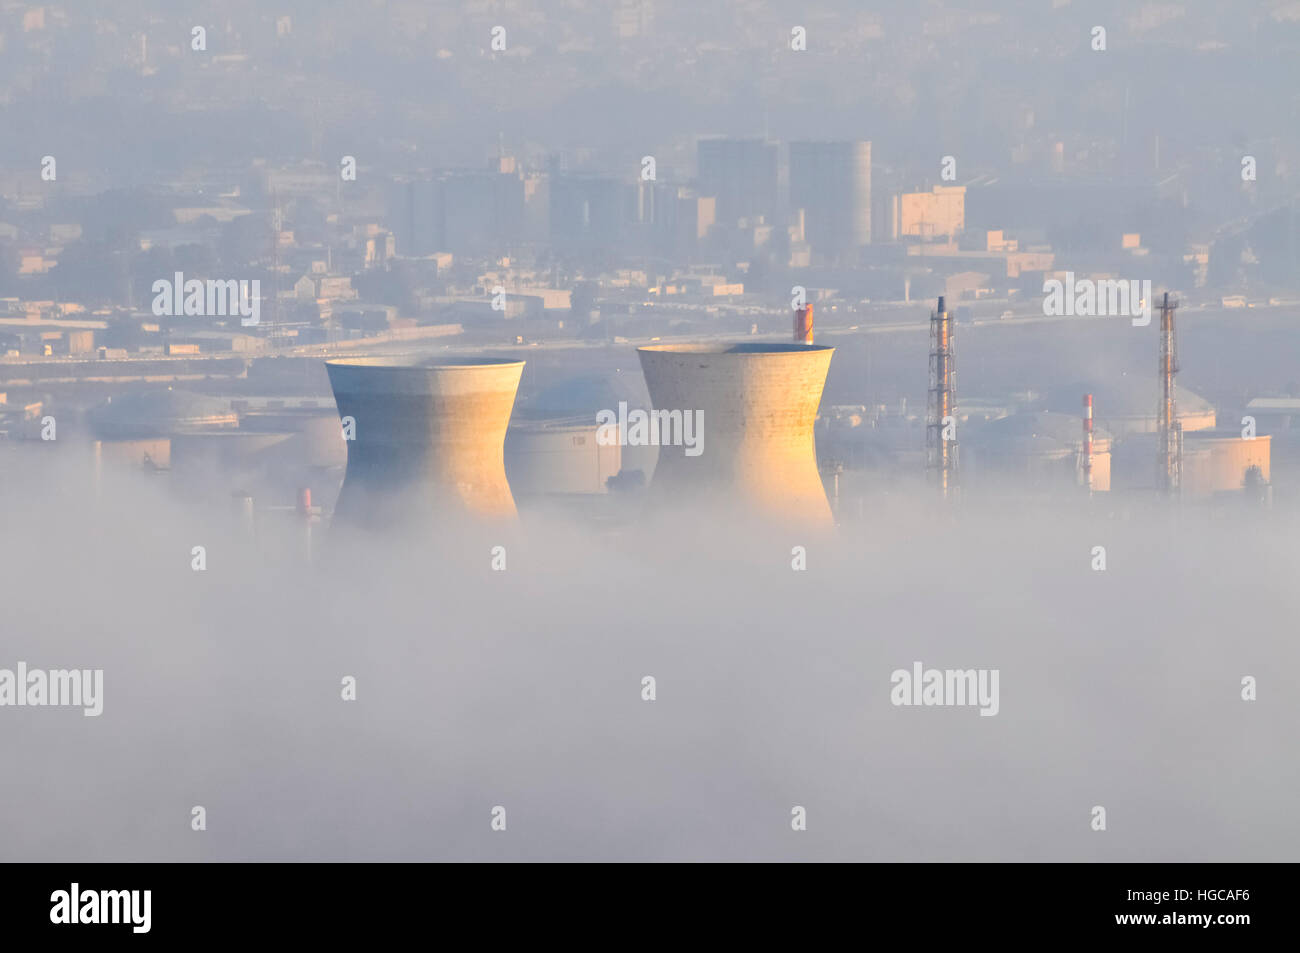 Petrochemical factory and Oil Refinery in smoke and smog. Photographed in Haifa Bay, Israel Stock Photo